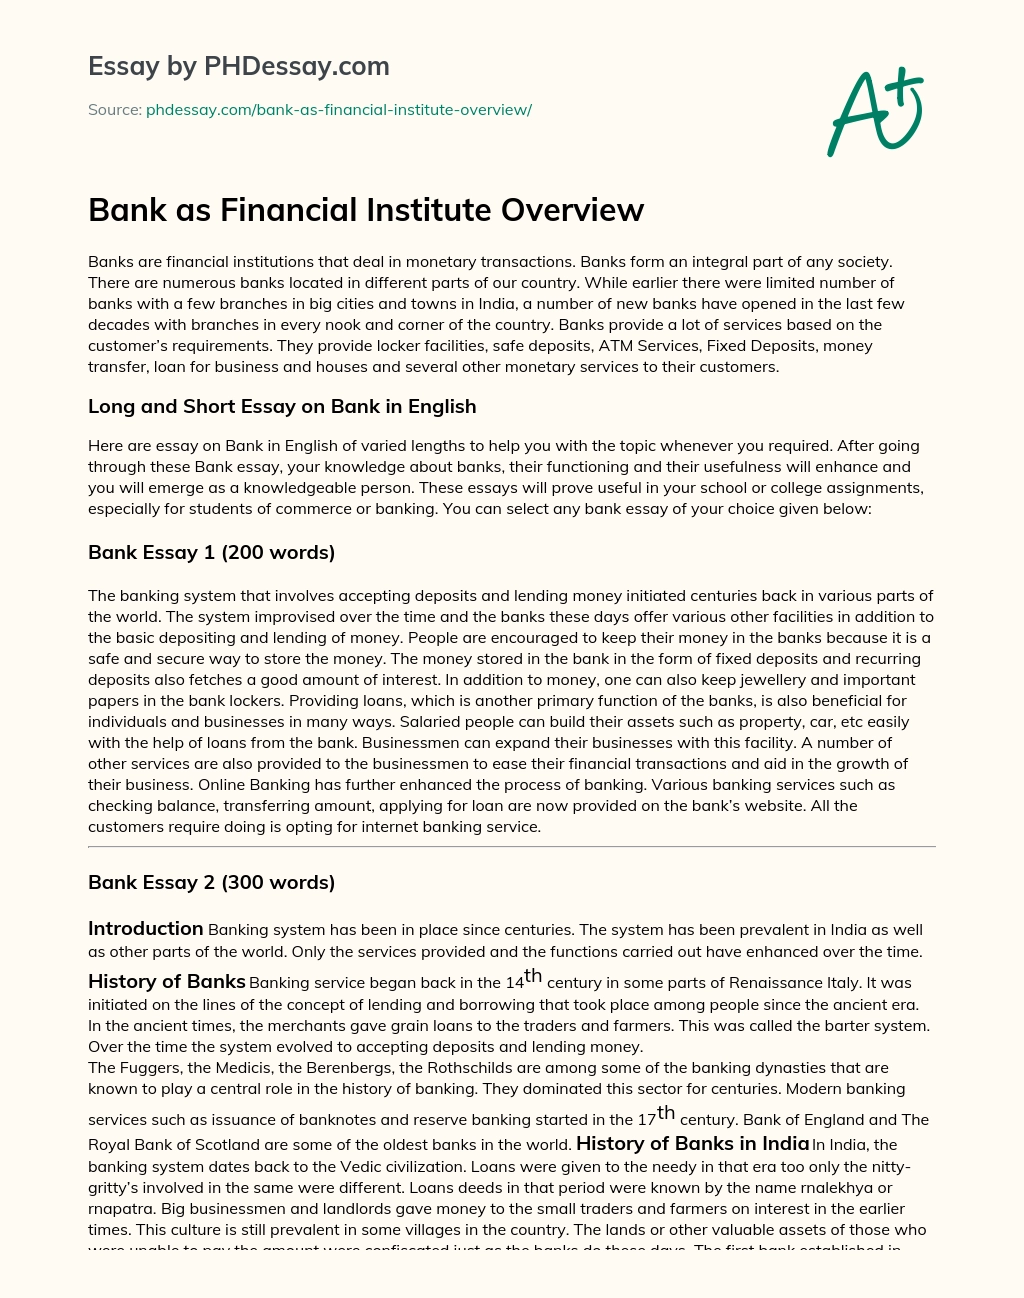 Bank as Financial Institute Overview essay